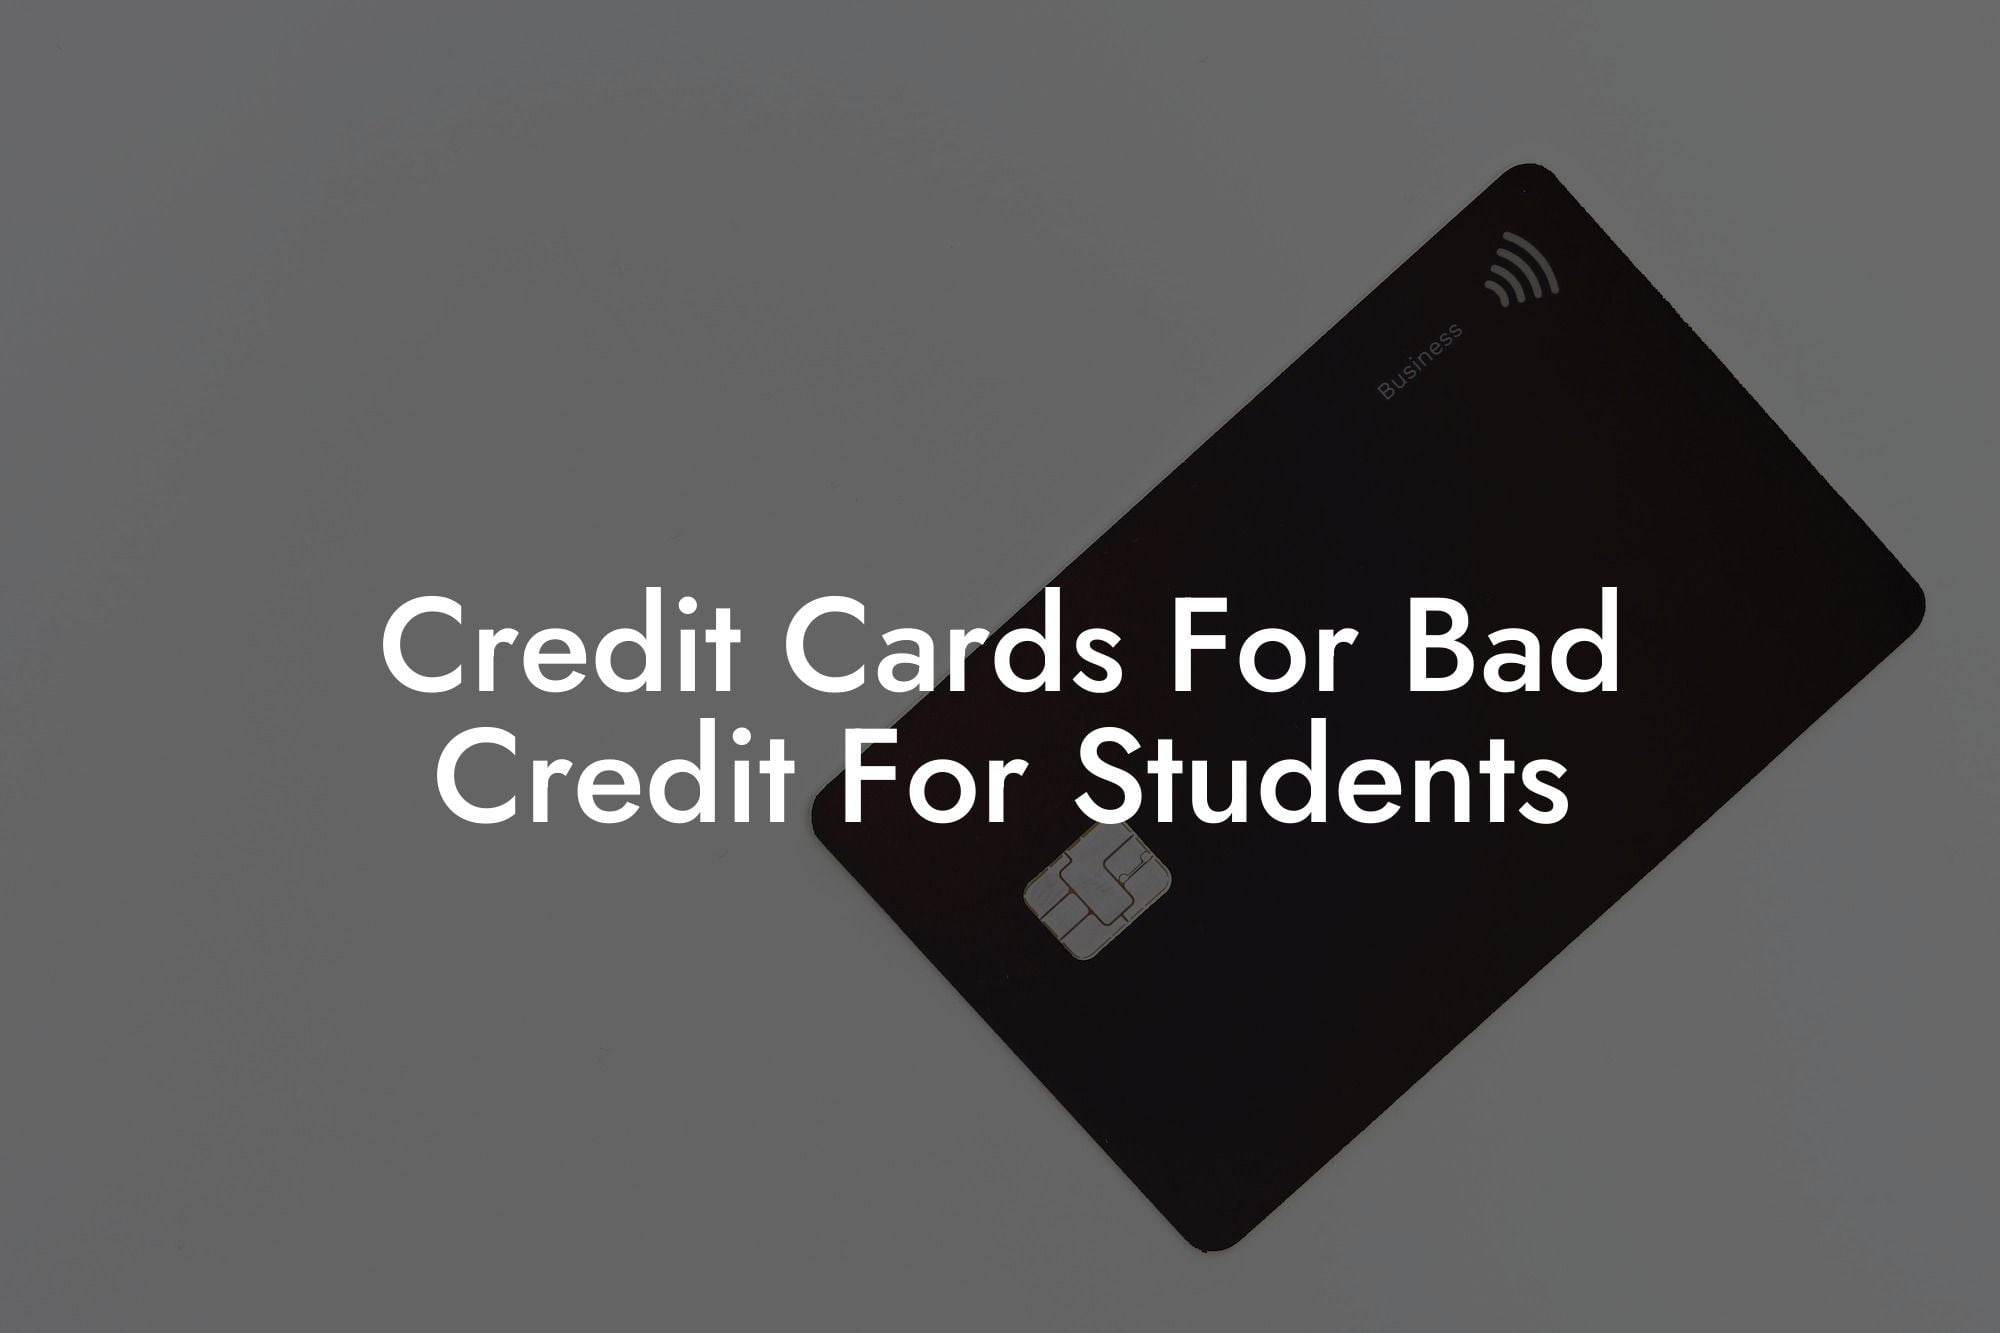 Credit Cards For Bad Credit For Students